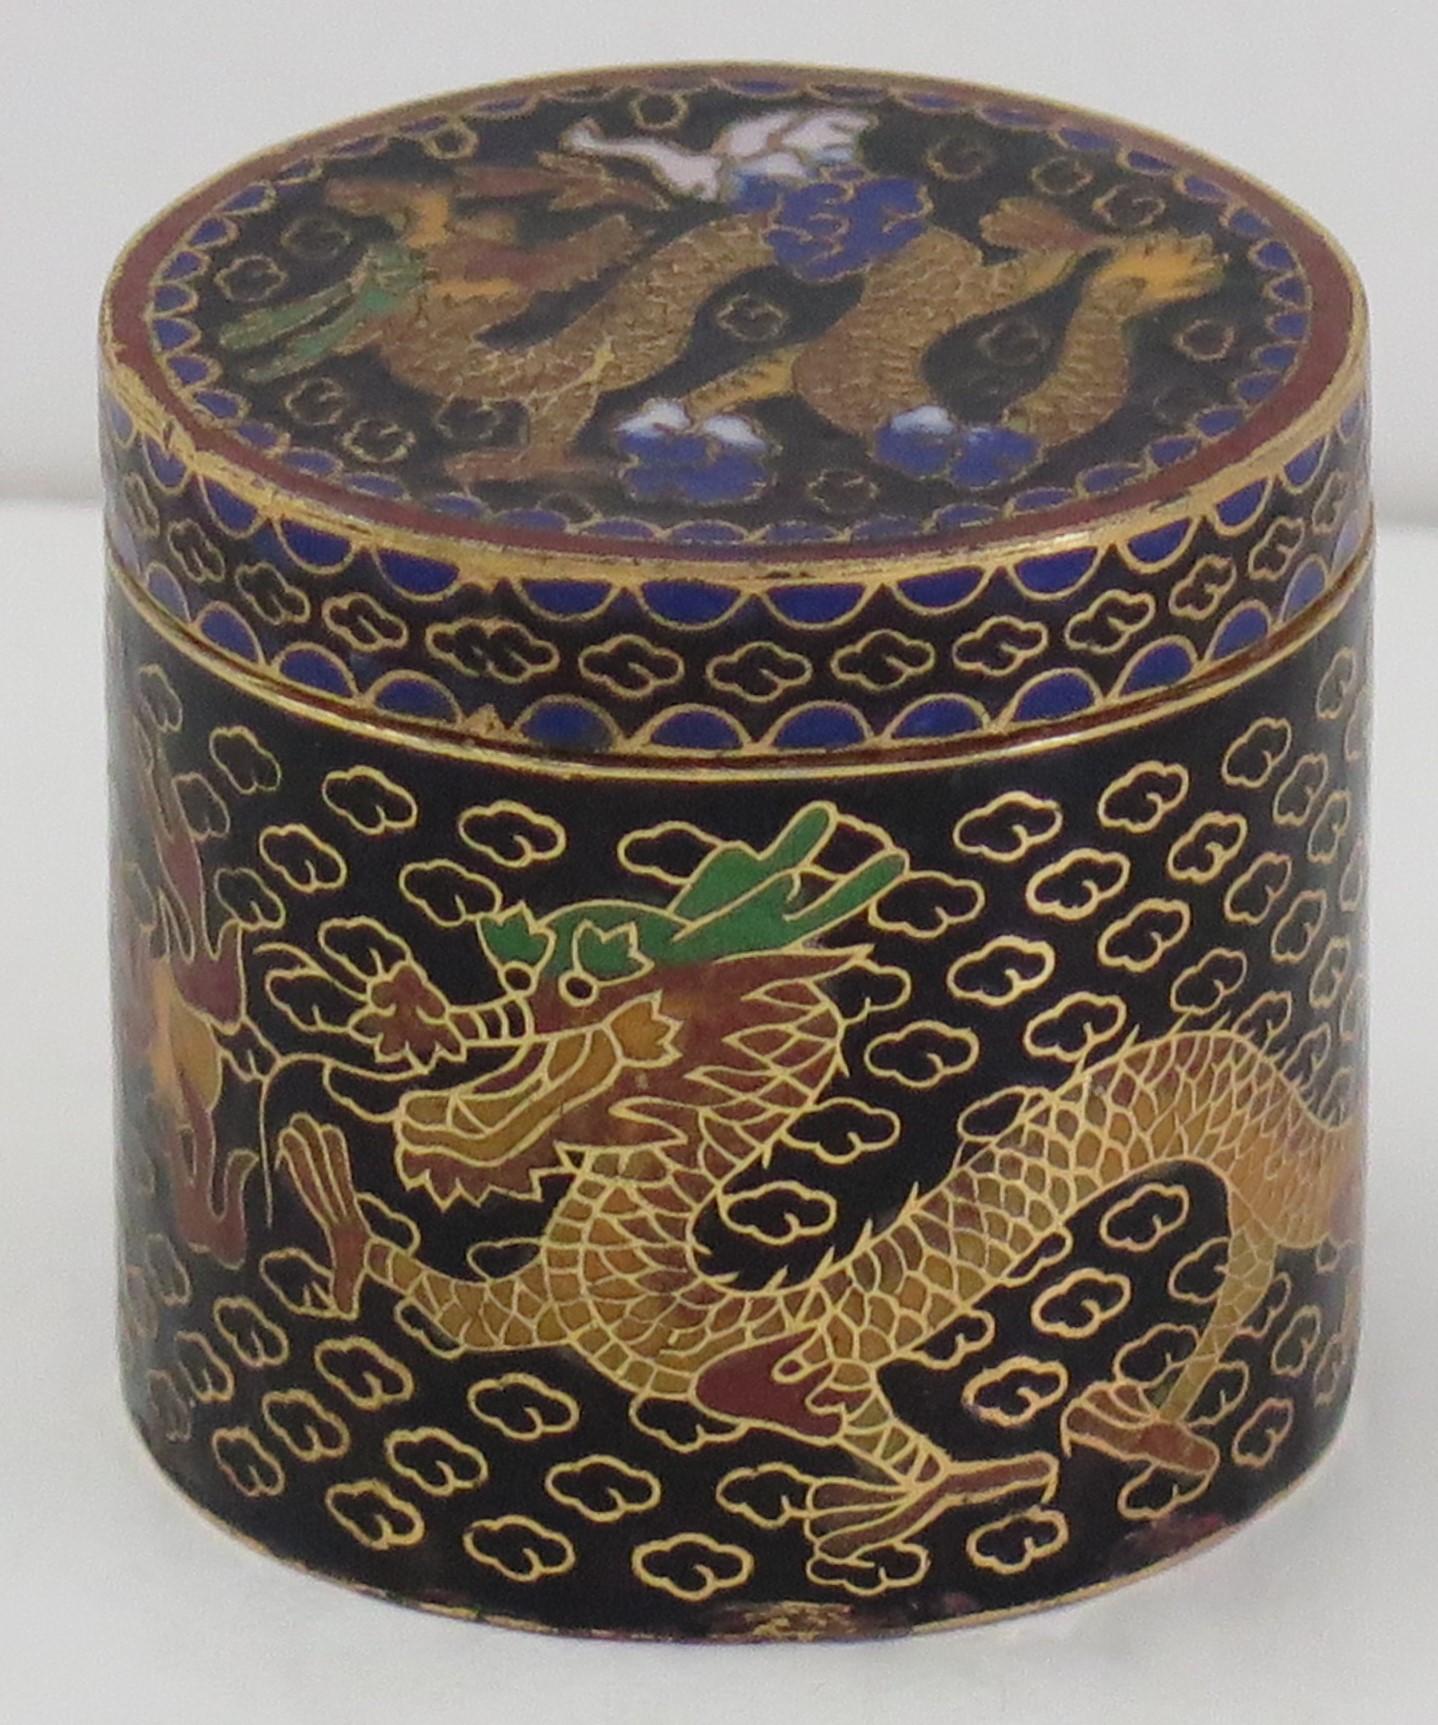 This is a very decorative Chinese cloisonné lidded box which we date to the mid 20th century.

The box has a cylindrical shape, with its original lid and is all beautifully made with colored enamels set into a black ground. 

The main decoration